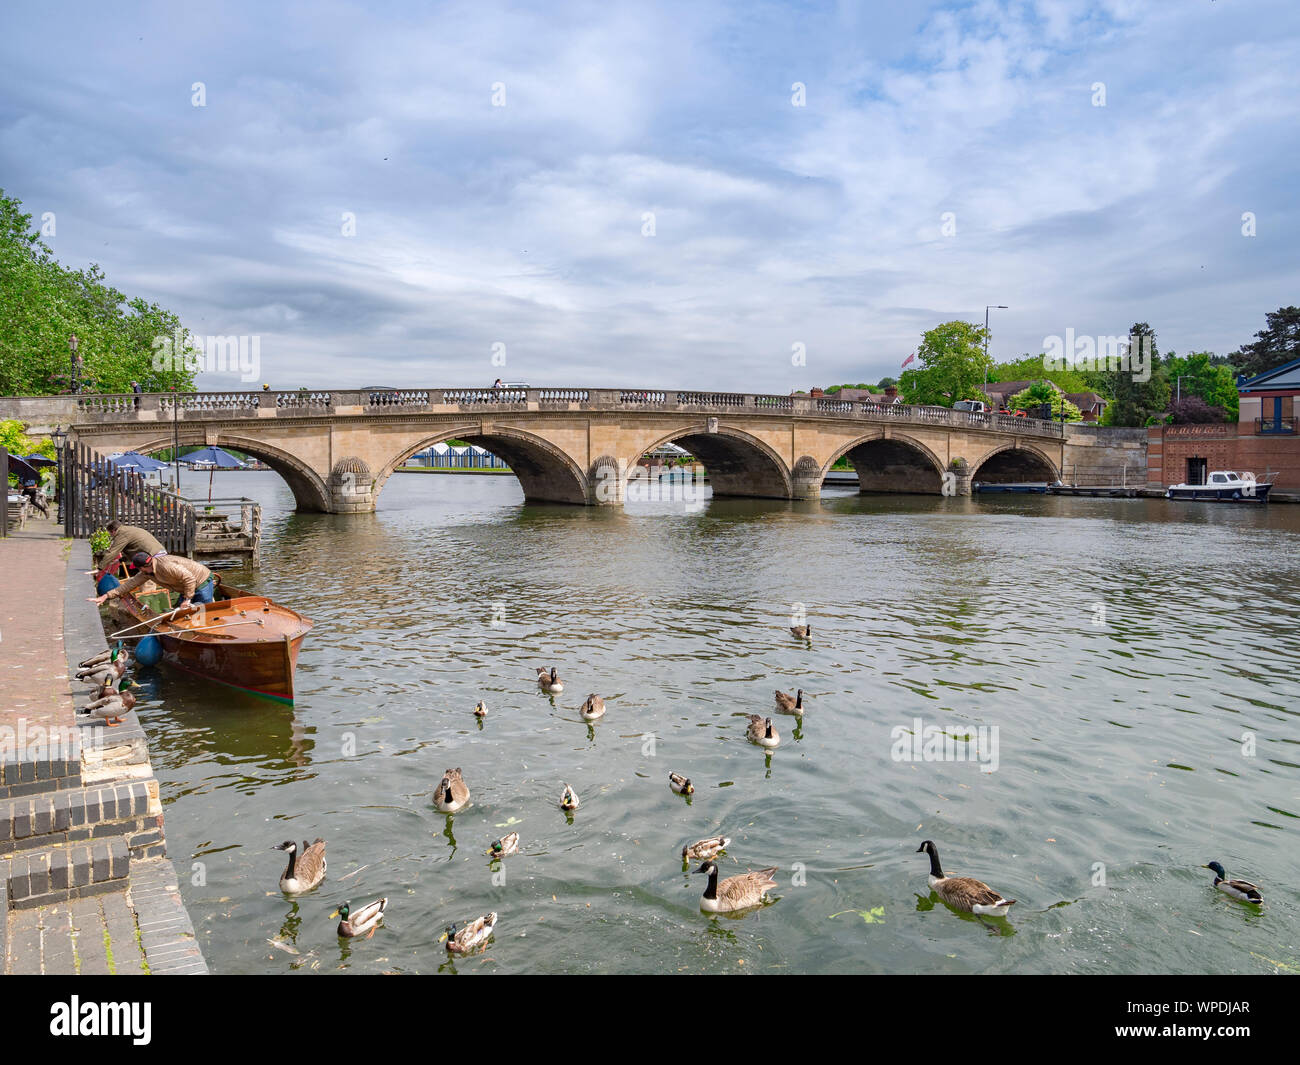 4 June 2019: Henley-on-Thames, Oxfordshire - The River Thames and Henley Bridge, Henley-on-Thames. Stock Photo